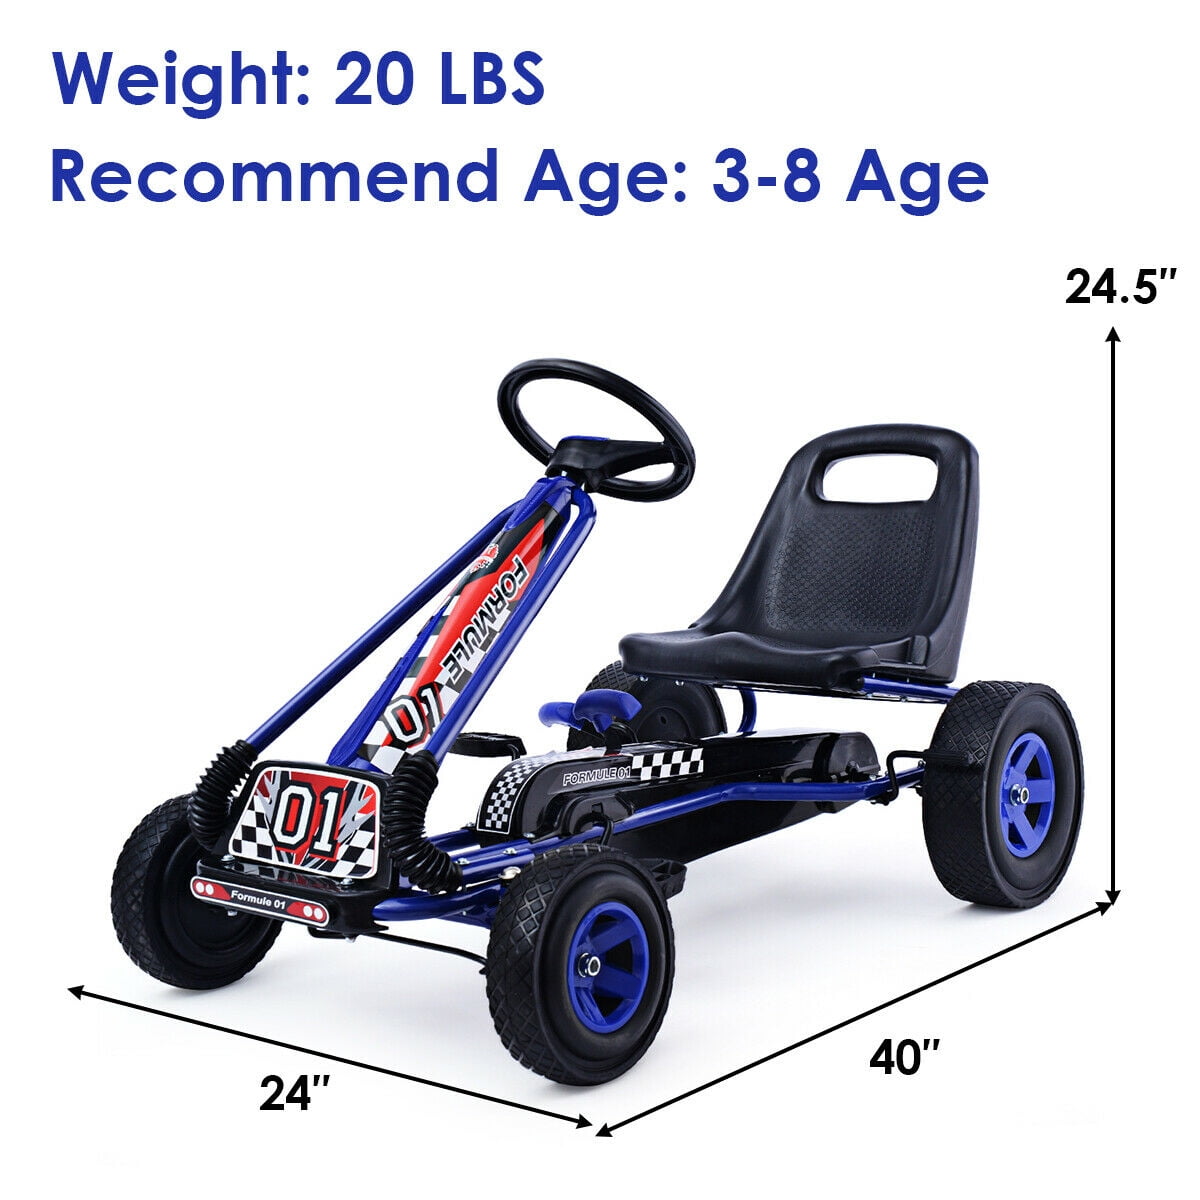 Pedal Powered Ride On Toys with Rear Wheel Drive System 4 Wheels with Anti-Slip Strips for Boys and Girls Age 3 to 7 Years Old Blue Costzon Pedal Go Kart 34.5 x 18 x 20.5 